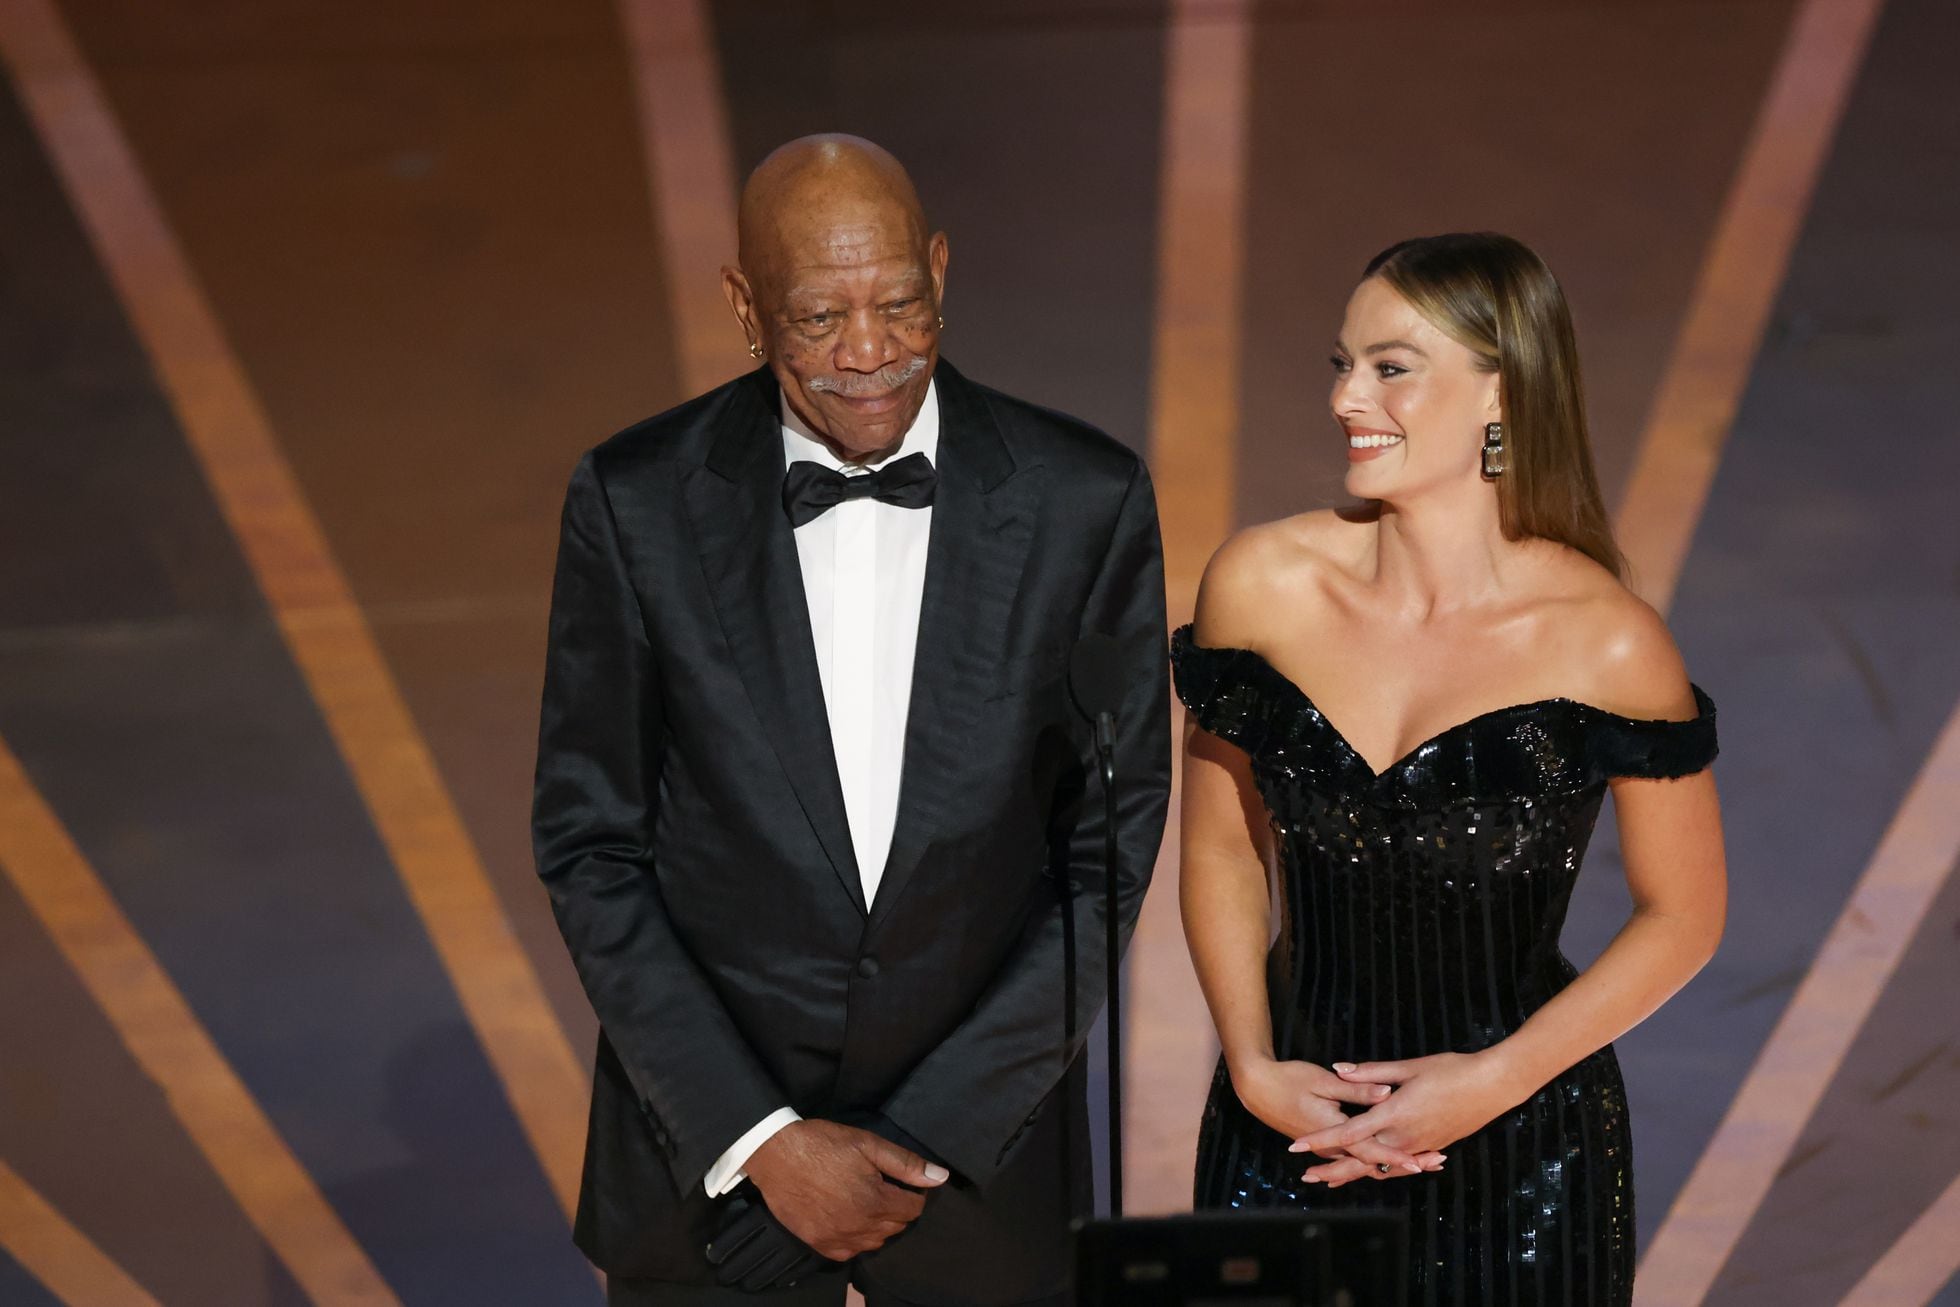 Morgan Freeman and Margot Robbie at the Oscars in 2023. MYUNG J. CHUN (LOS ANGELES TIMES VIA GETTY IMAG)